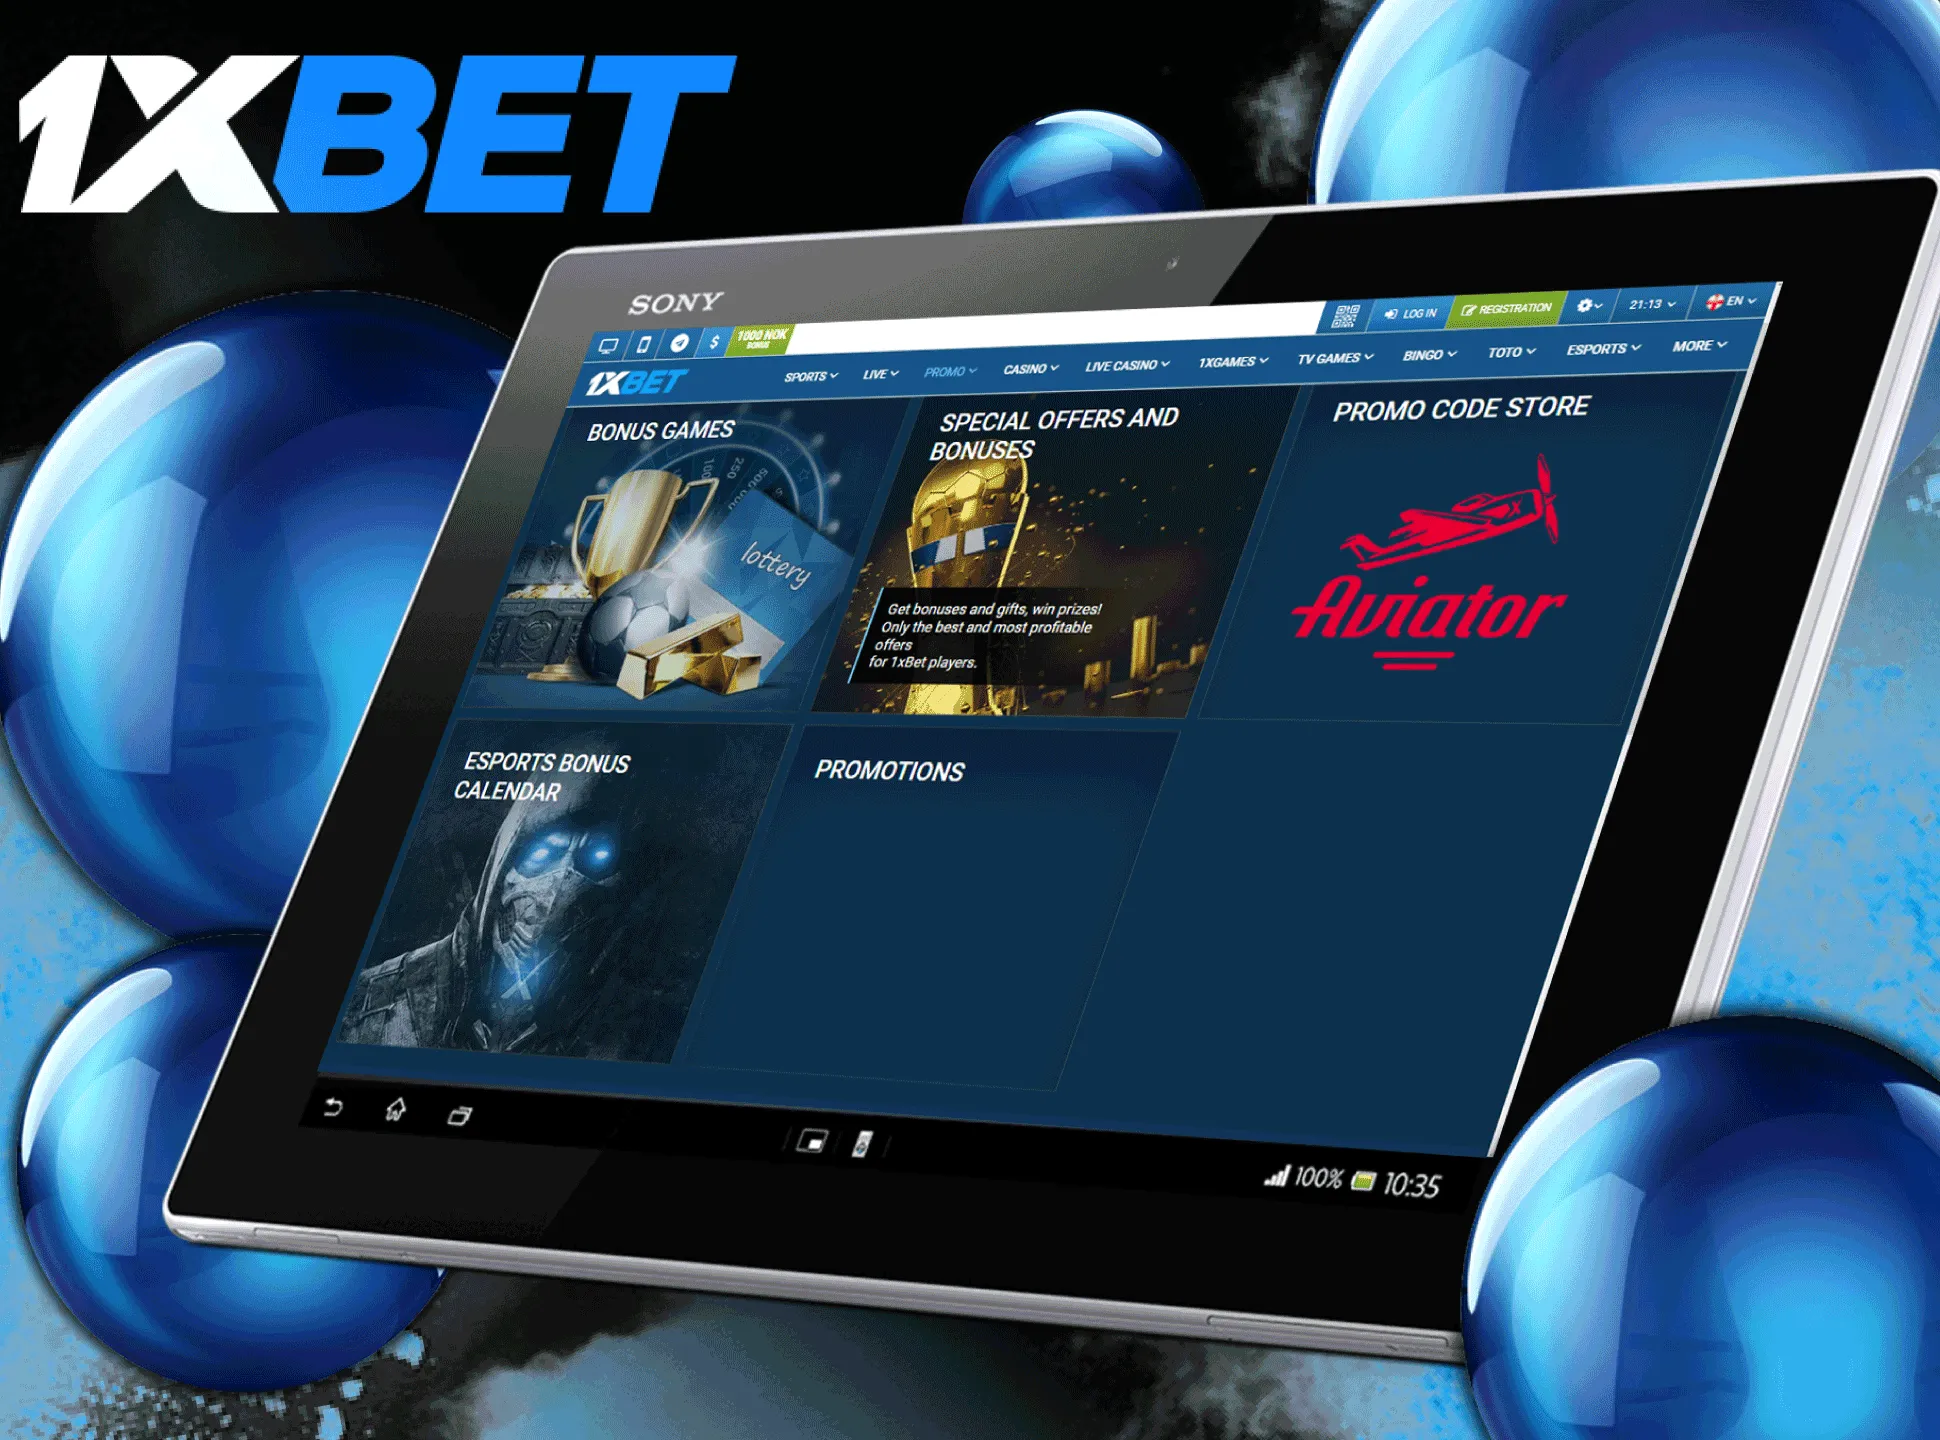 Users can find many various bonuses at 1xbet.